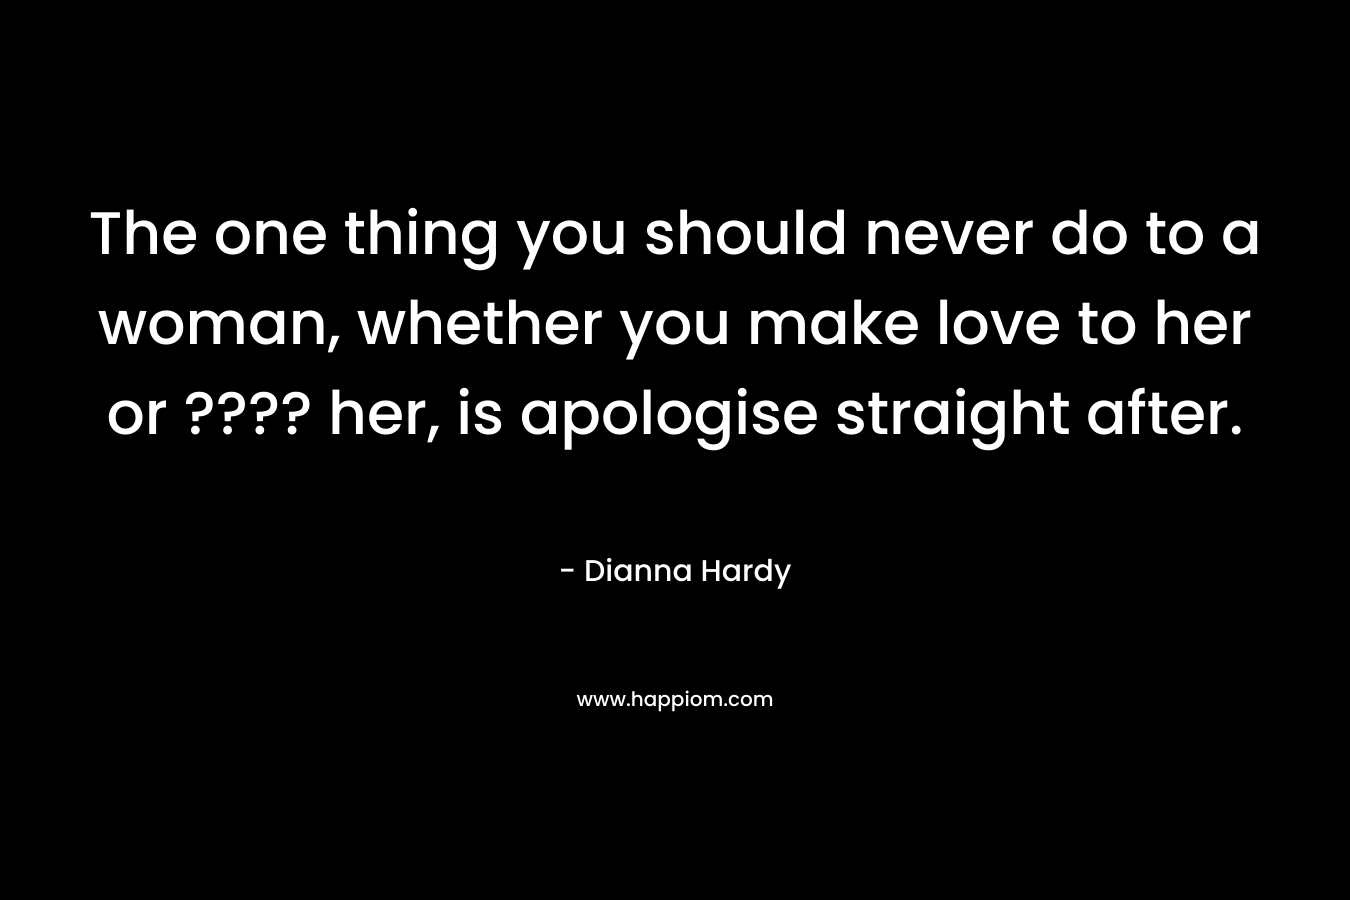 The one thing you should never do to a woman, whether you make love to her or ???? her, is apologise straight after.